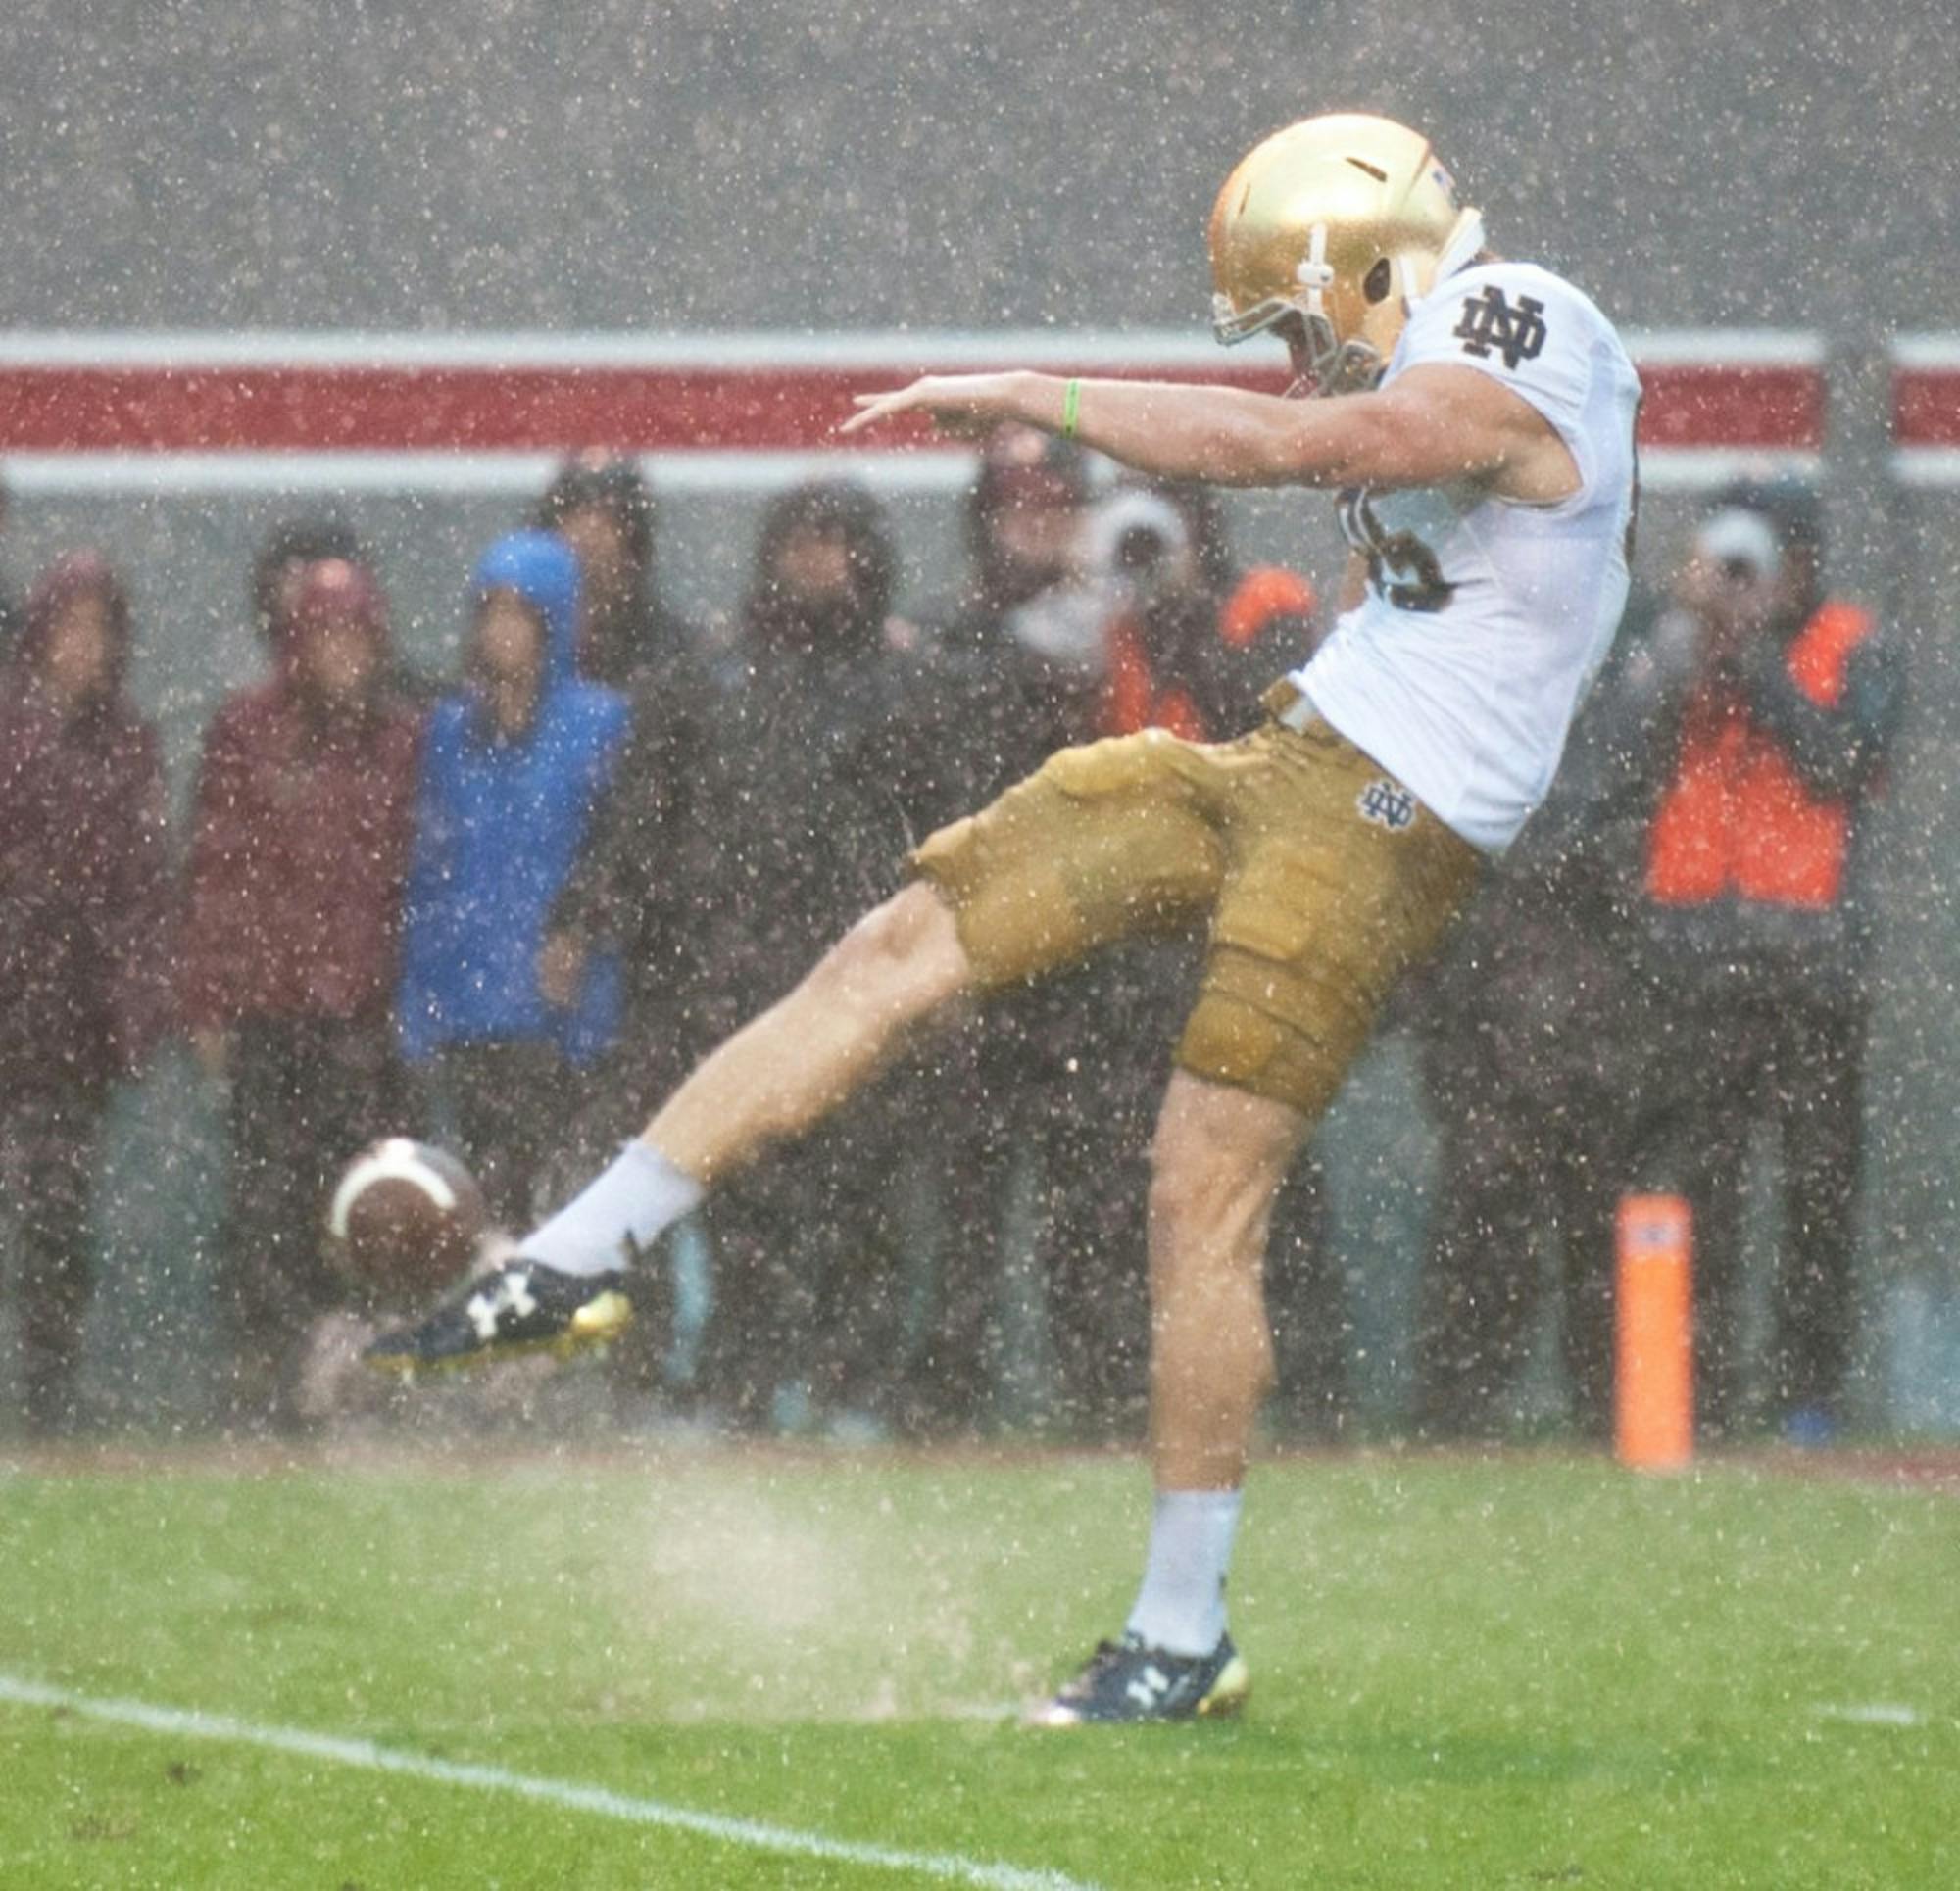 Irish junior punter Tyler Newsome gets off a punt during Saturday’s game. N.C. State returned a blocked punt for a touchdown late to win.